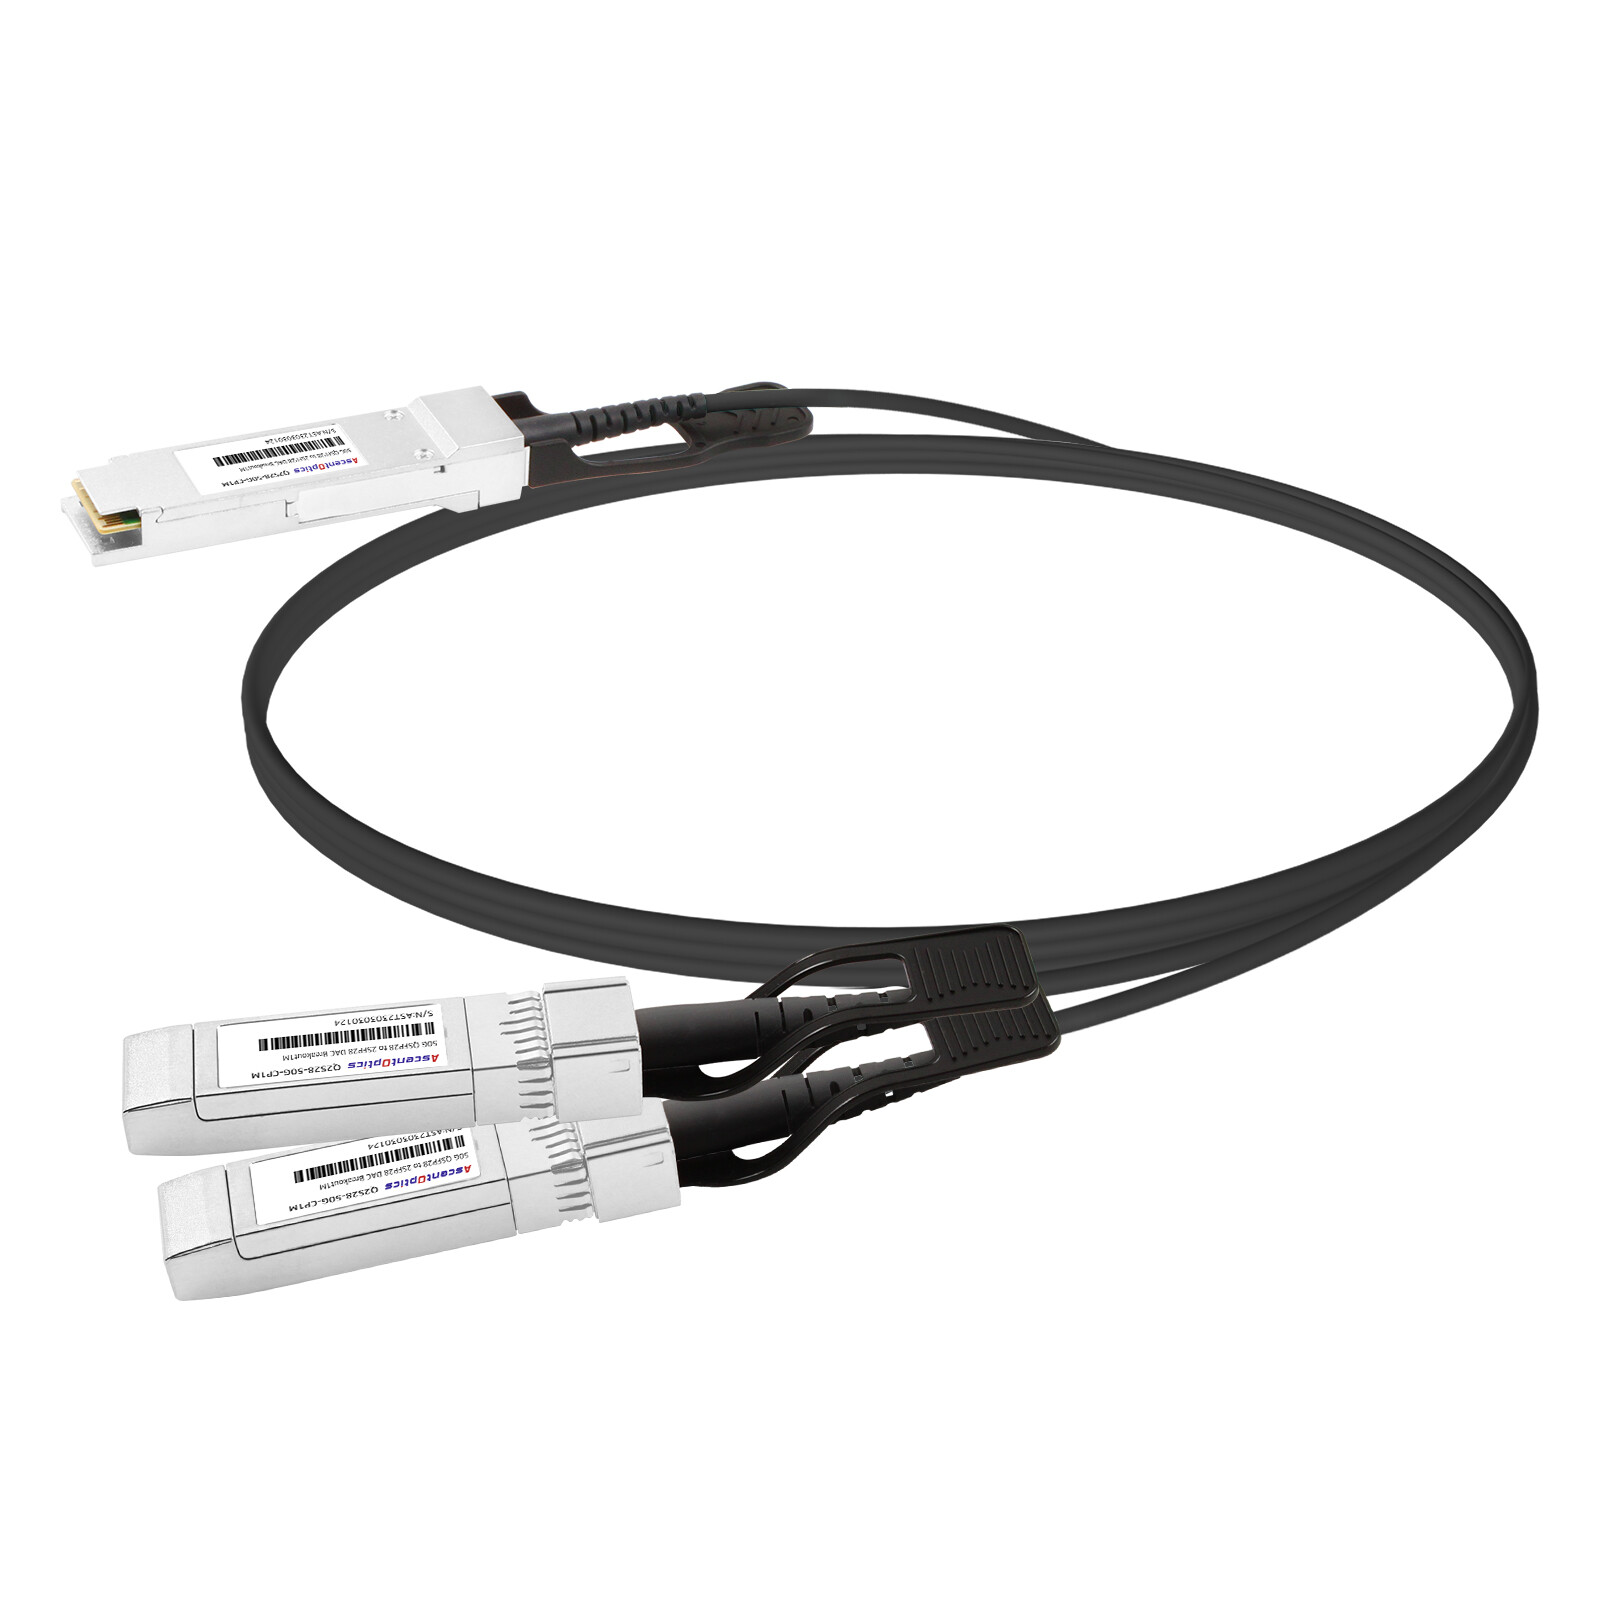 50G QSFP28 to 2x 25G SFP28 Copper Breakout Cable,1 Meter,Passive